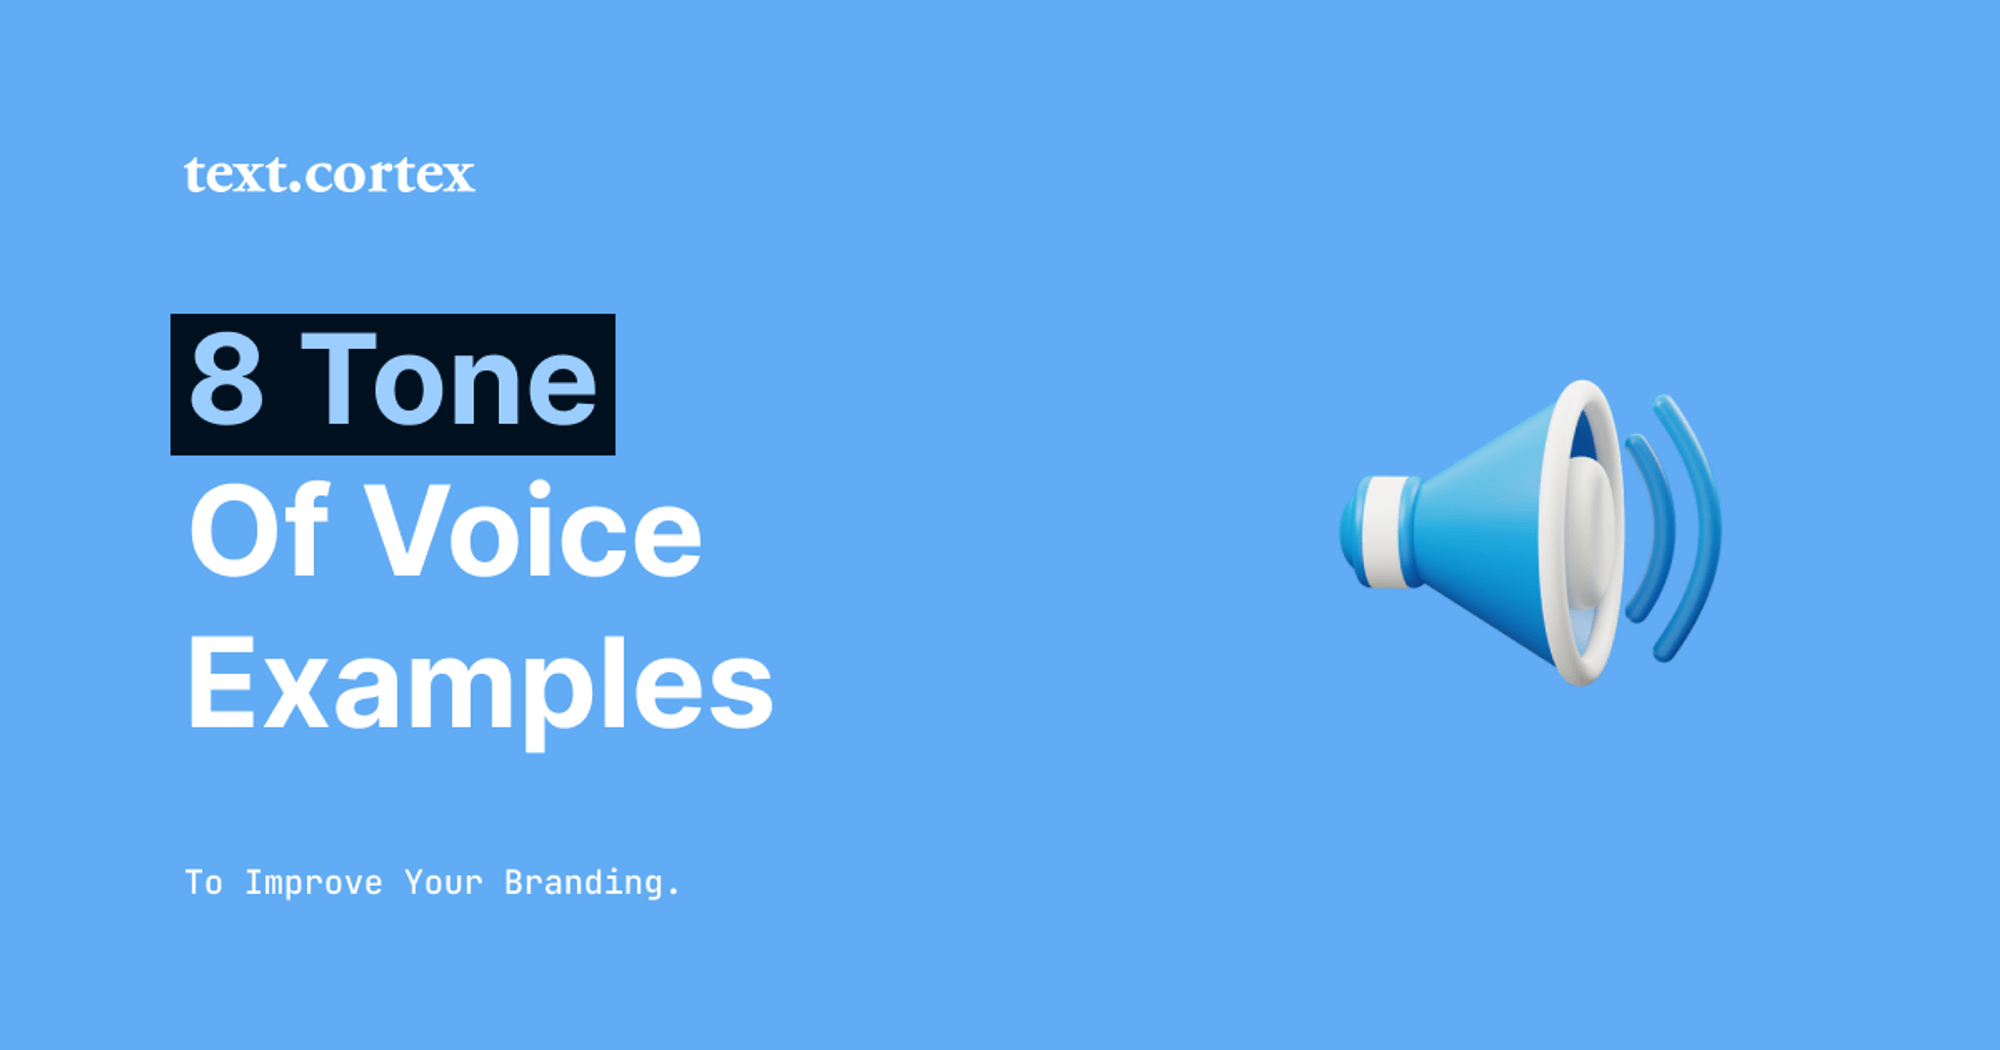 8 Tone of Voice Examples To Improve Your Branding